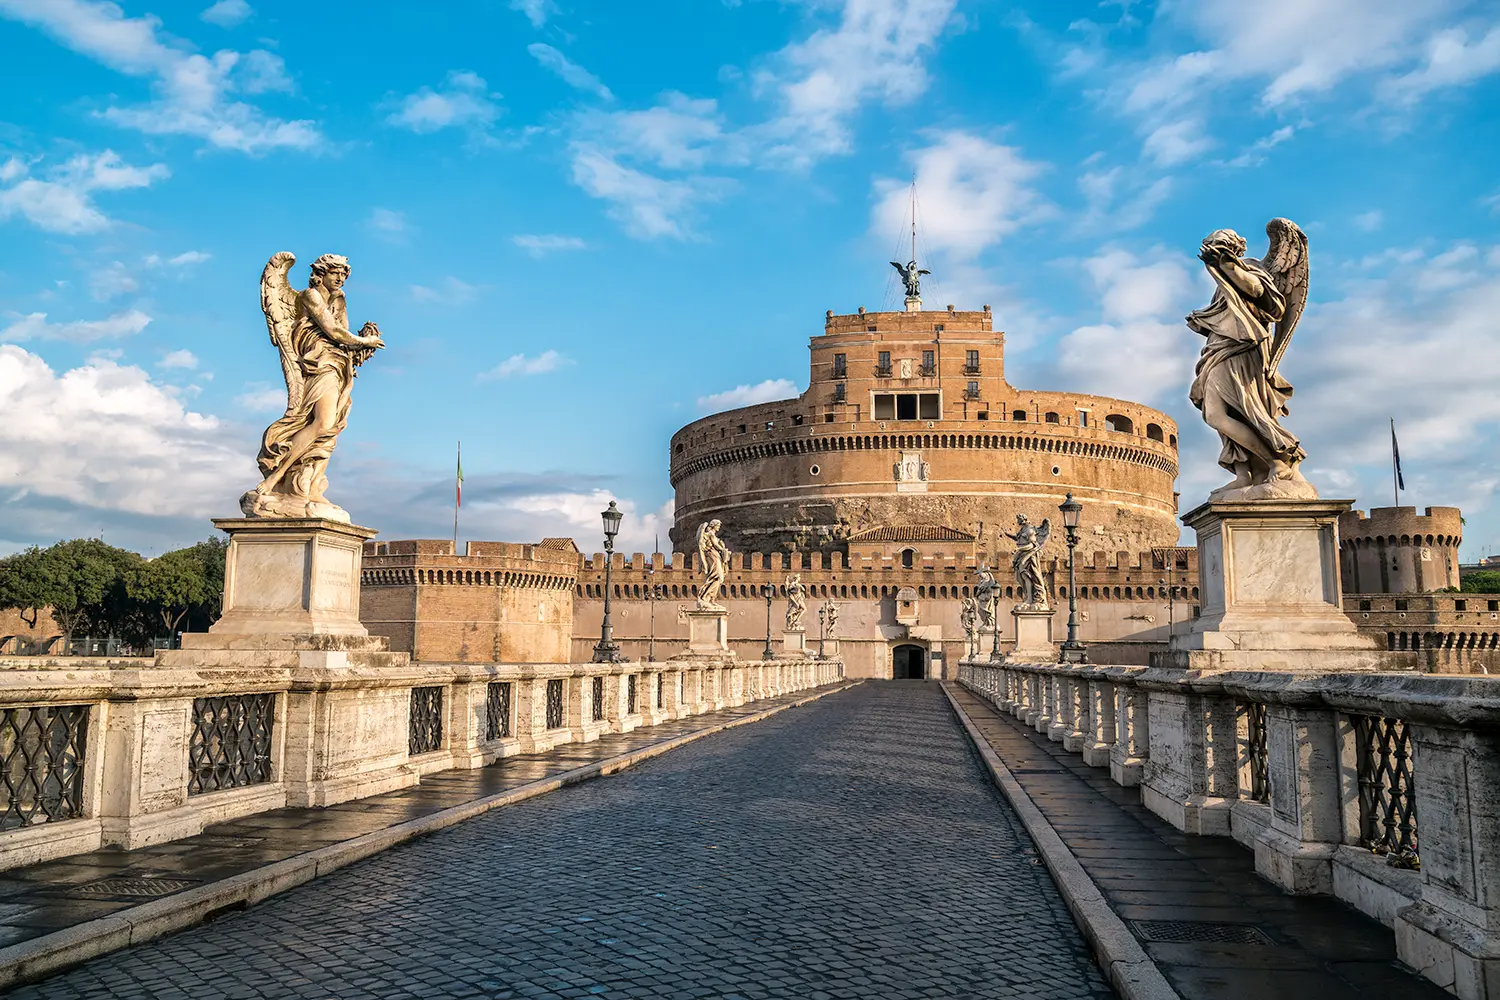 Castel Sant Angelo or Mausoleum of Hadrian in Rome, Italy